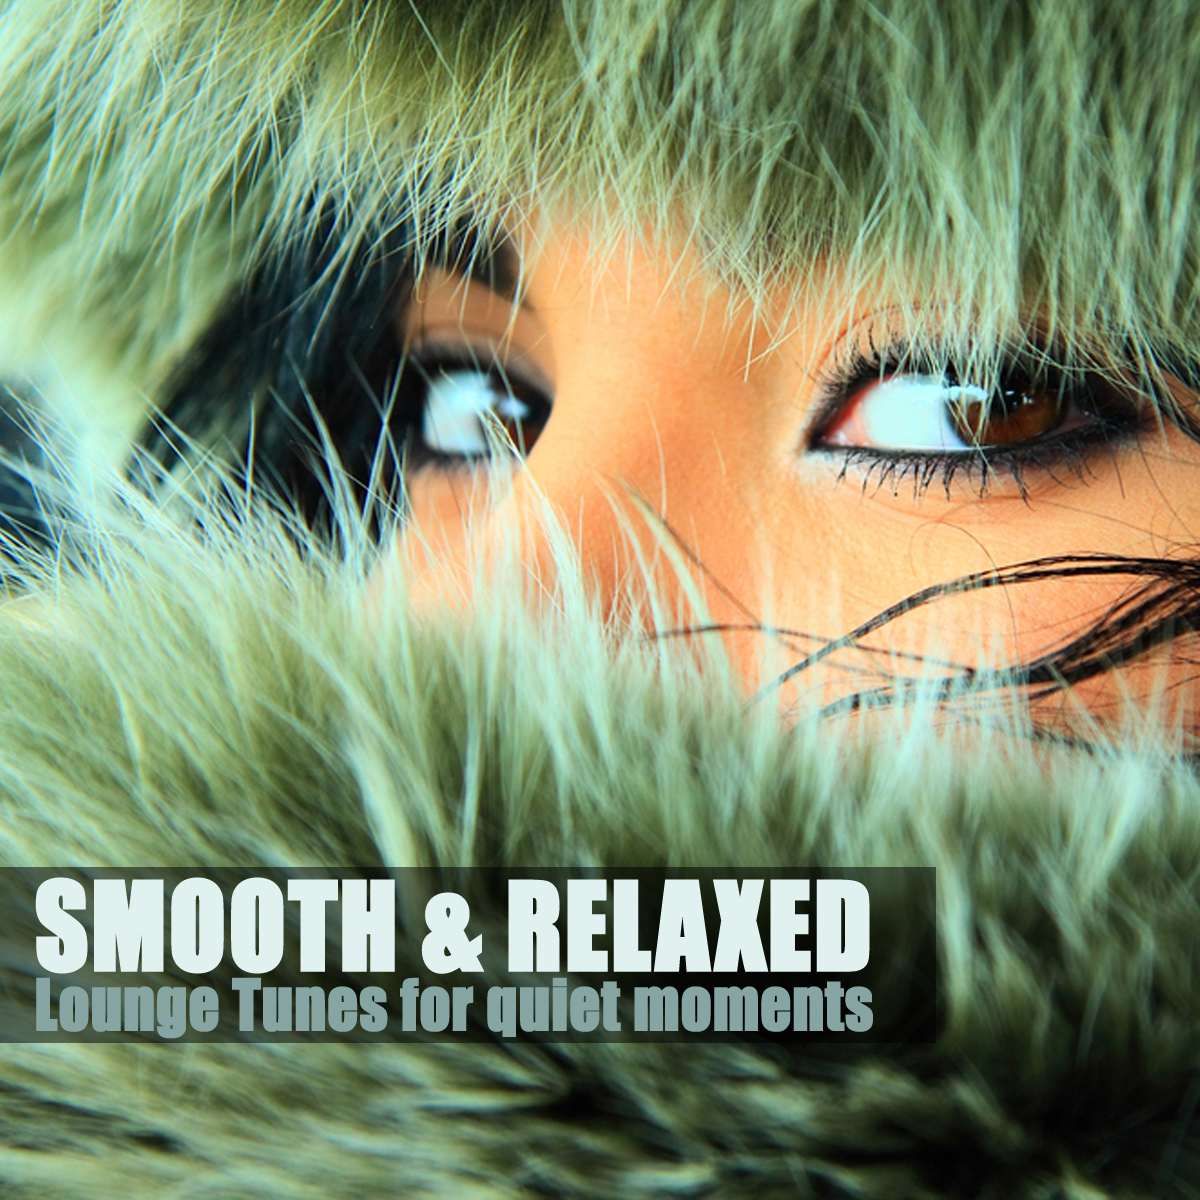 Smooth & Relaxed - Lounge Tunes for Quiet Moments